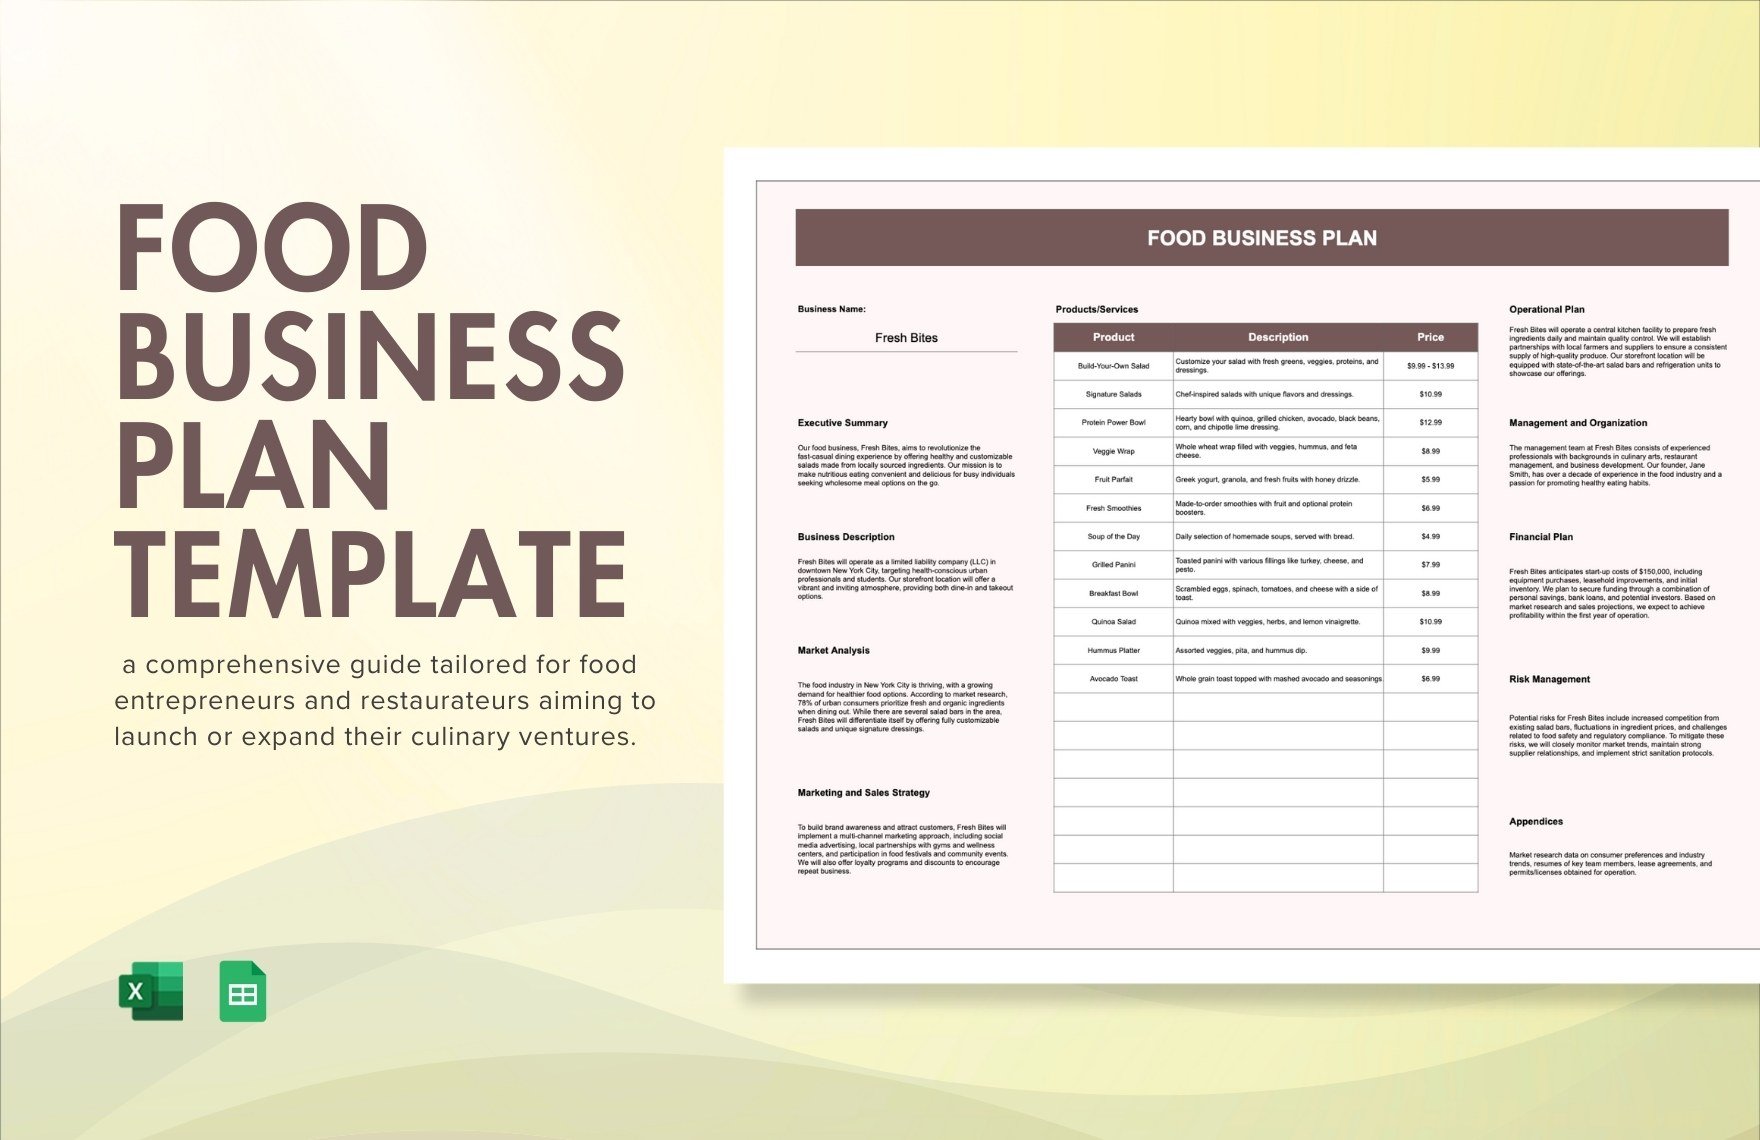 Food Business Plan Template in Excel, Google Sheets